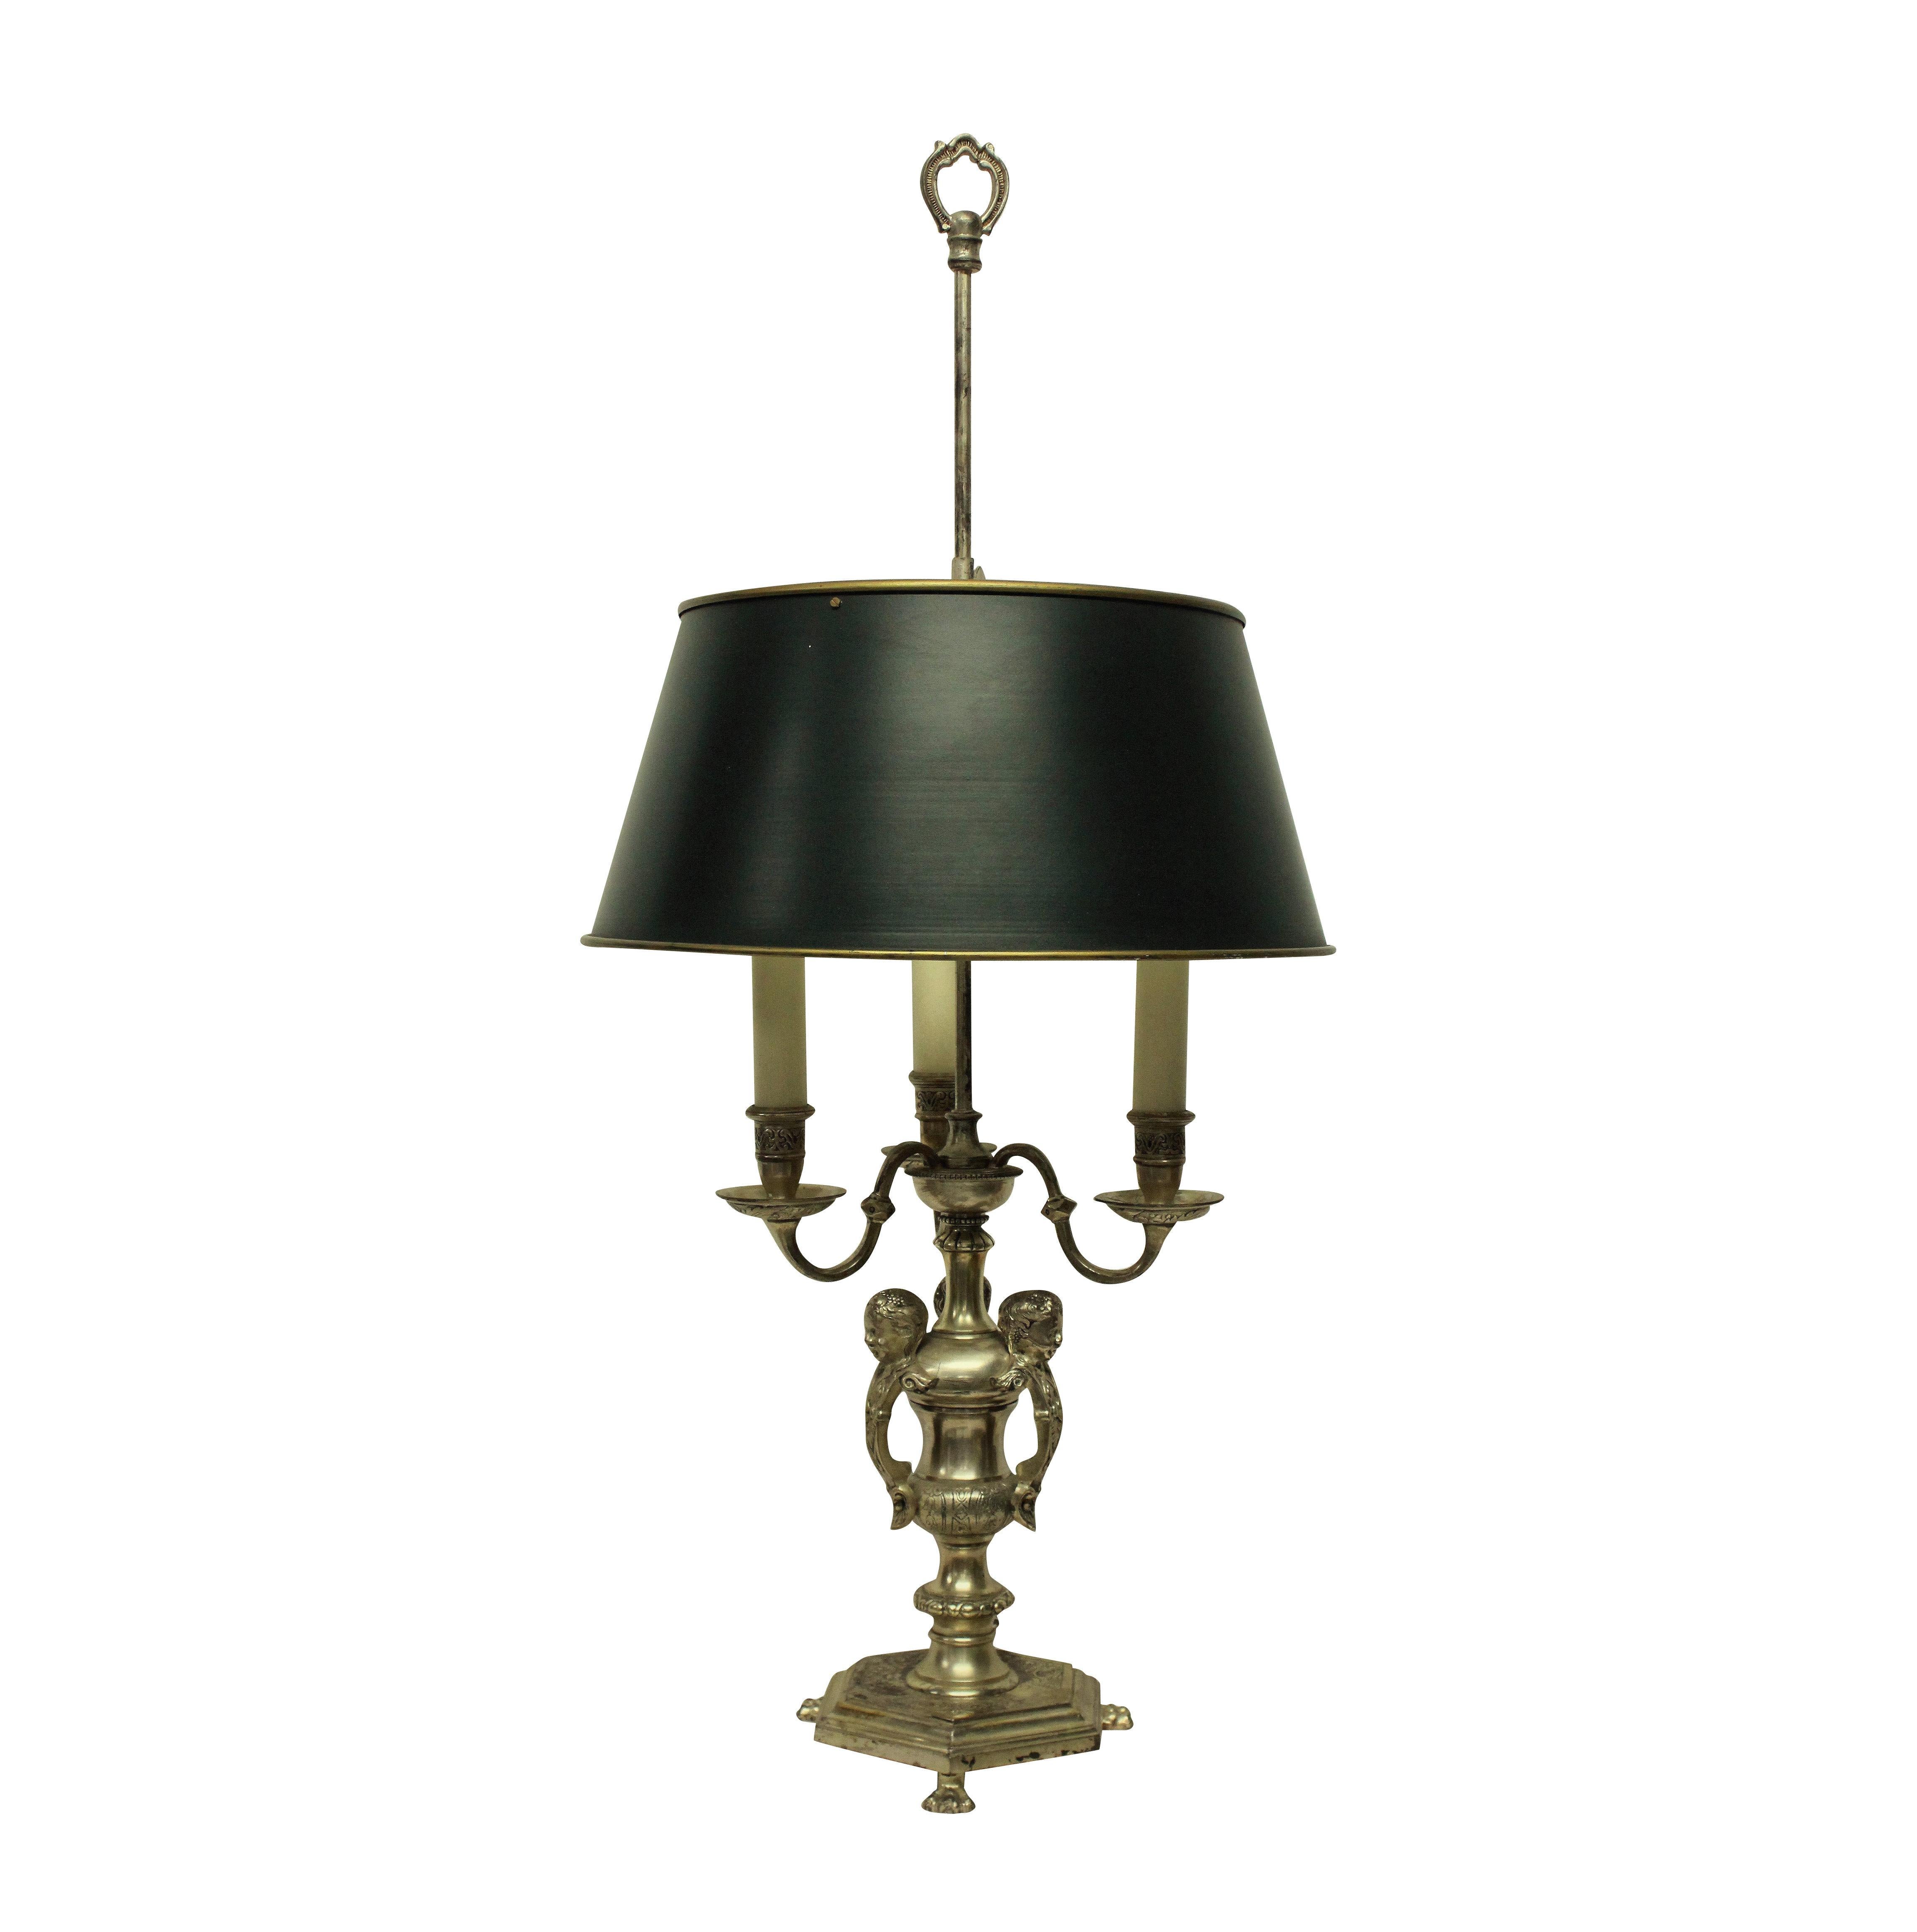 An English silver plated bronze Bouillotte lamp of good quality after Knole.

With three lights and an adjustable shade in dark green.